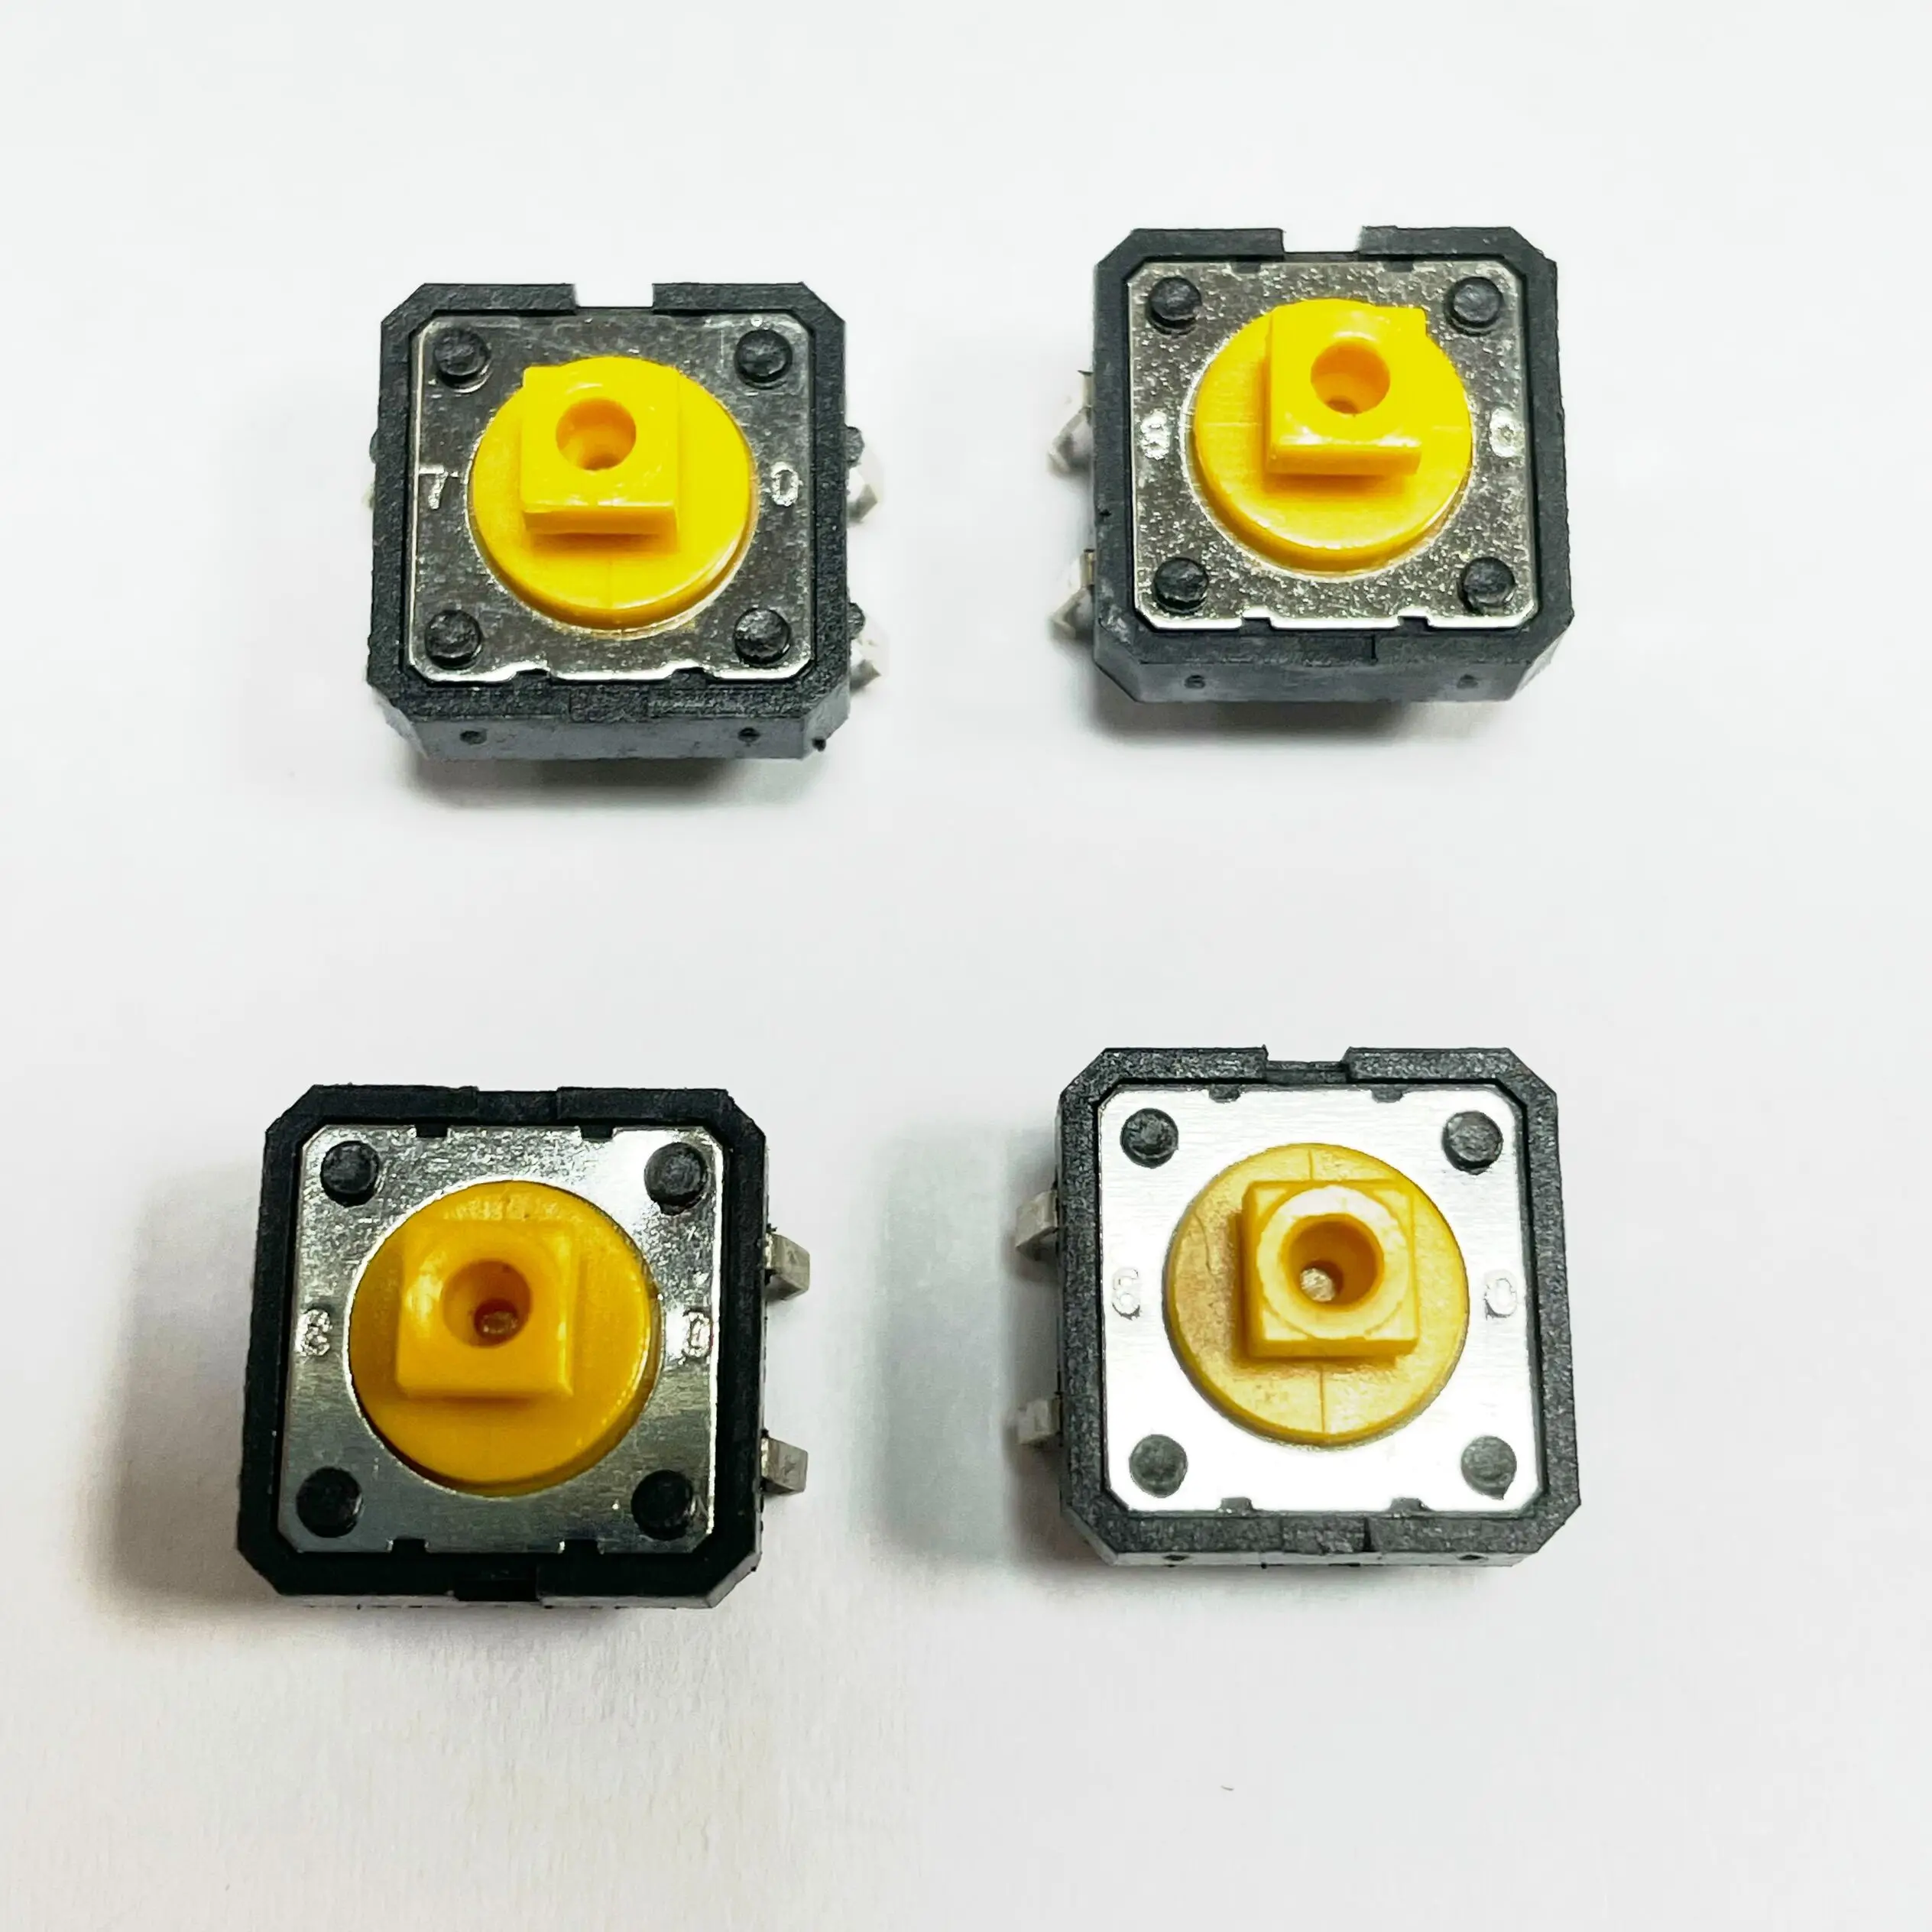 5PCS/LOT B3F-4055 12x12x7.3 mm Tactile Switches Yellow Square Push Button Tact Switch 12*12*7.3 mm Micro switch micro switch tactile push button for chery cowin car remote control key button switches 6 3 2 5